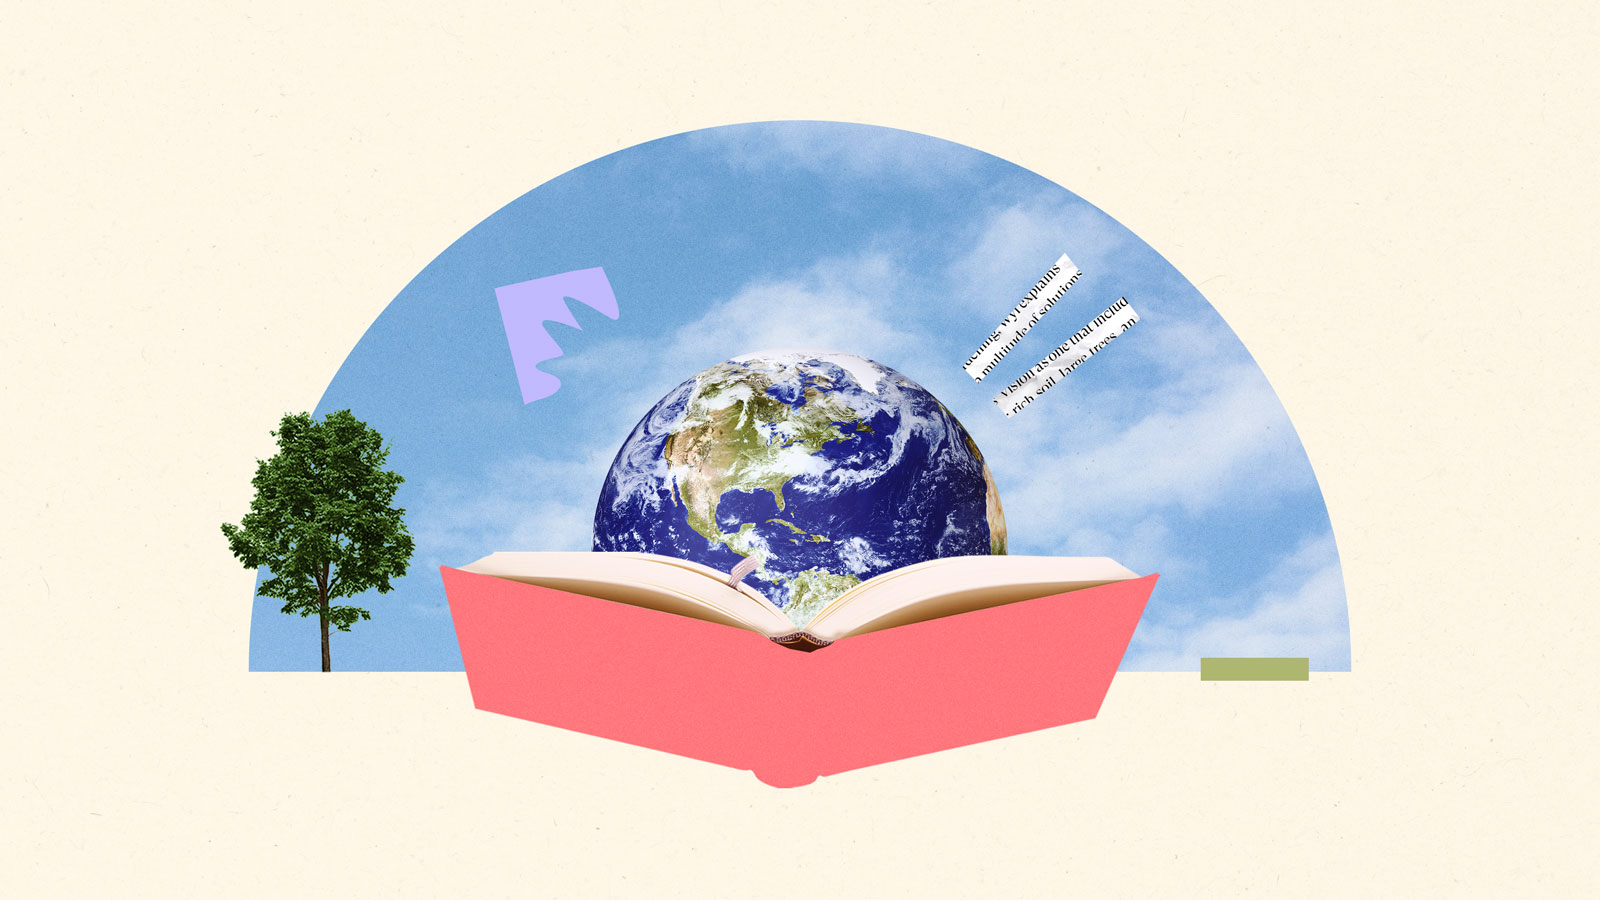 Illustration of an earth emerging from an open book